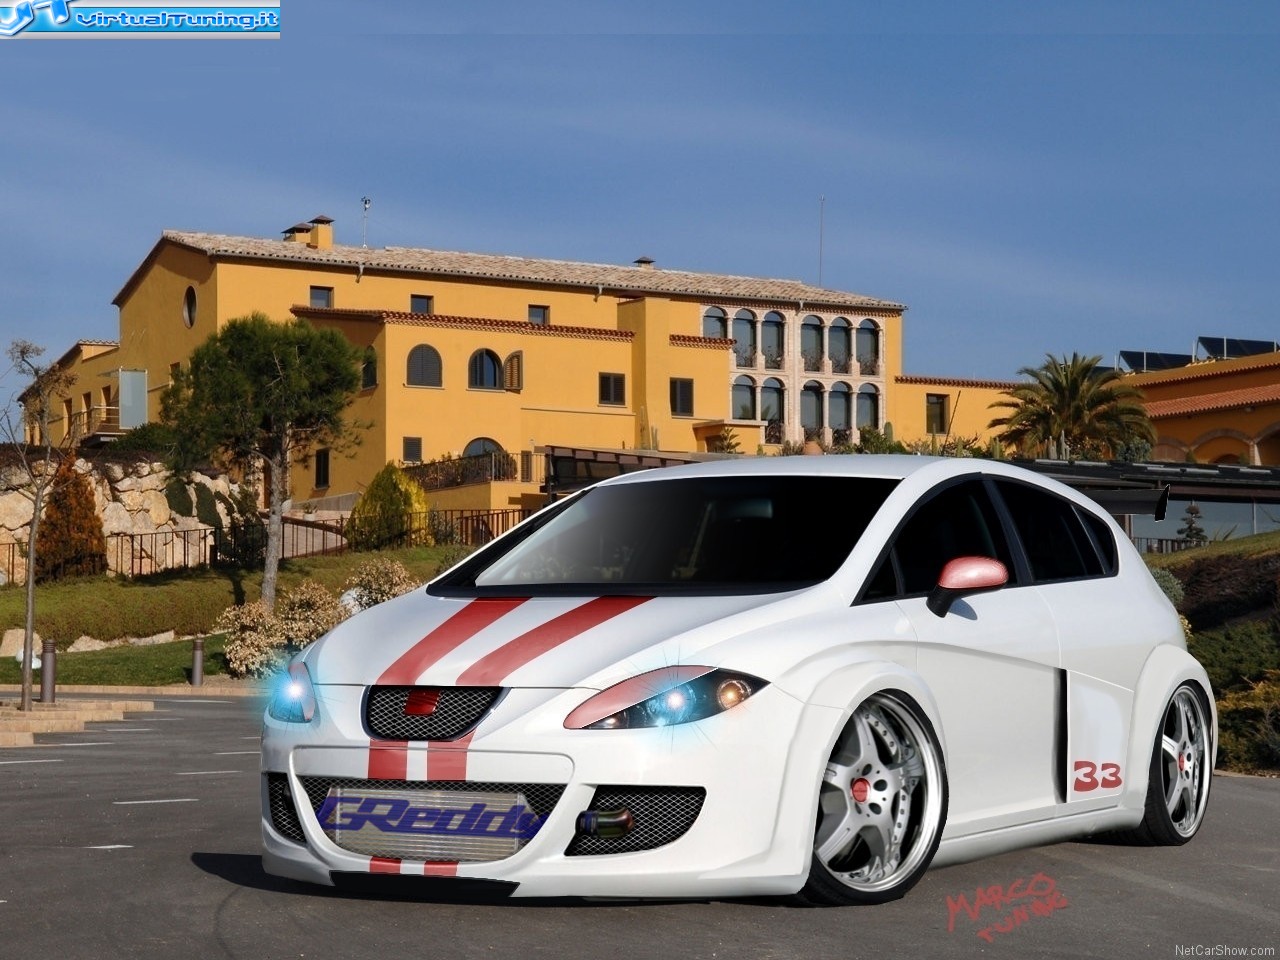 VirtualTuning SEAT Leon by marcofede33